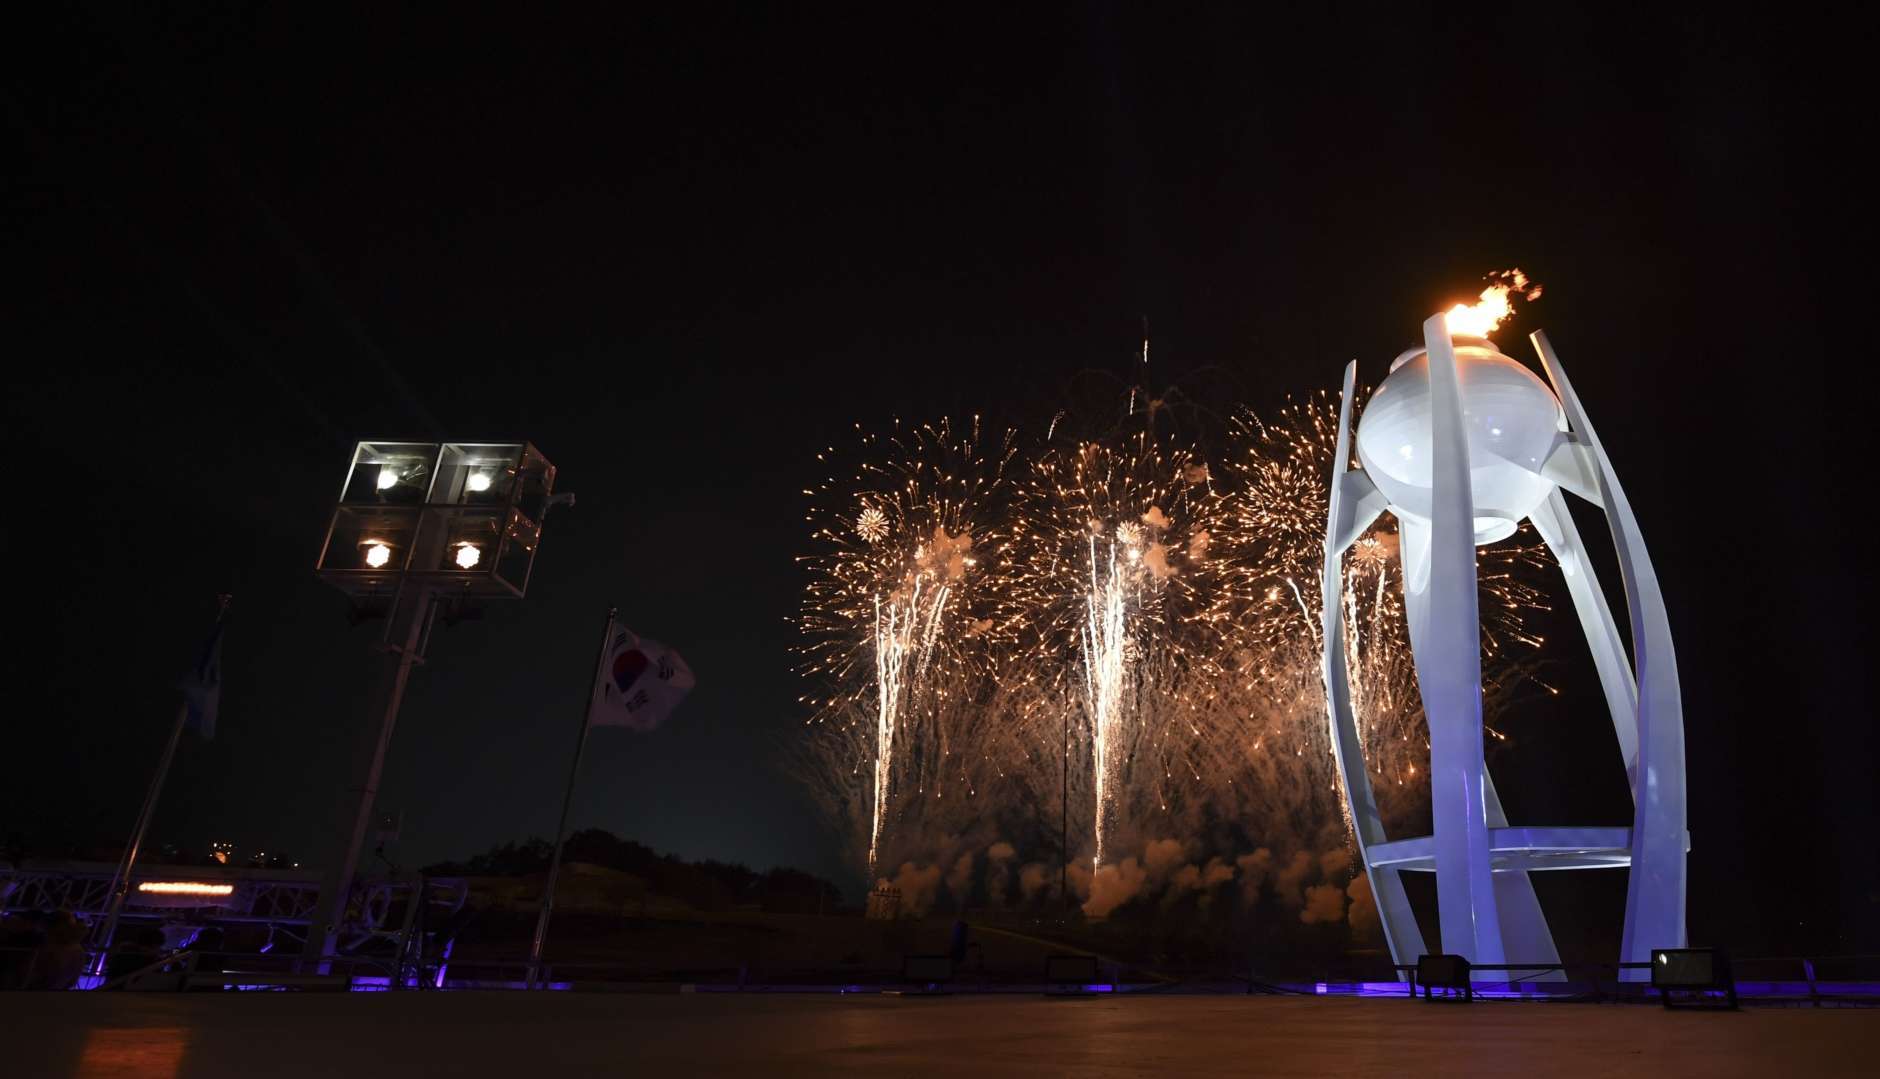 Fireworks explode behind the Olympic cauldron at the start of the closing ceremony of the 2018 Winter Olympics in Pyeongchang, South Korea, Sunday, Feb. 25, 2018. (Christof Stache/Pool Photo via AP)